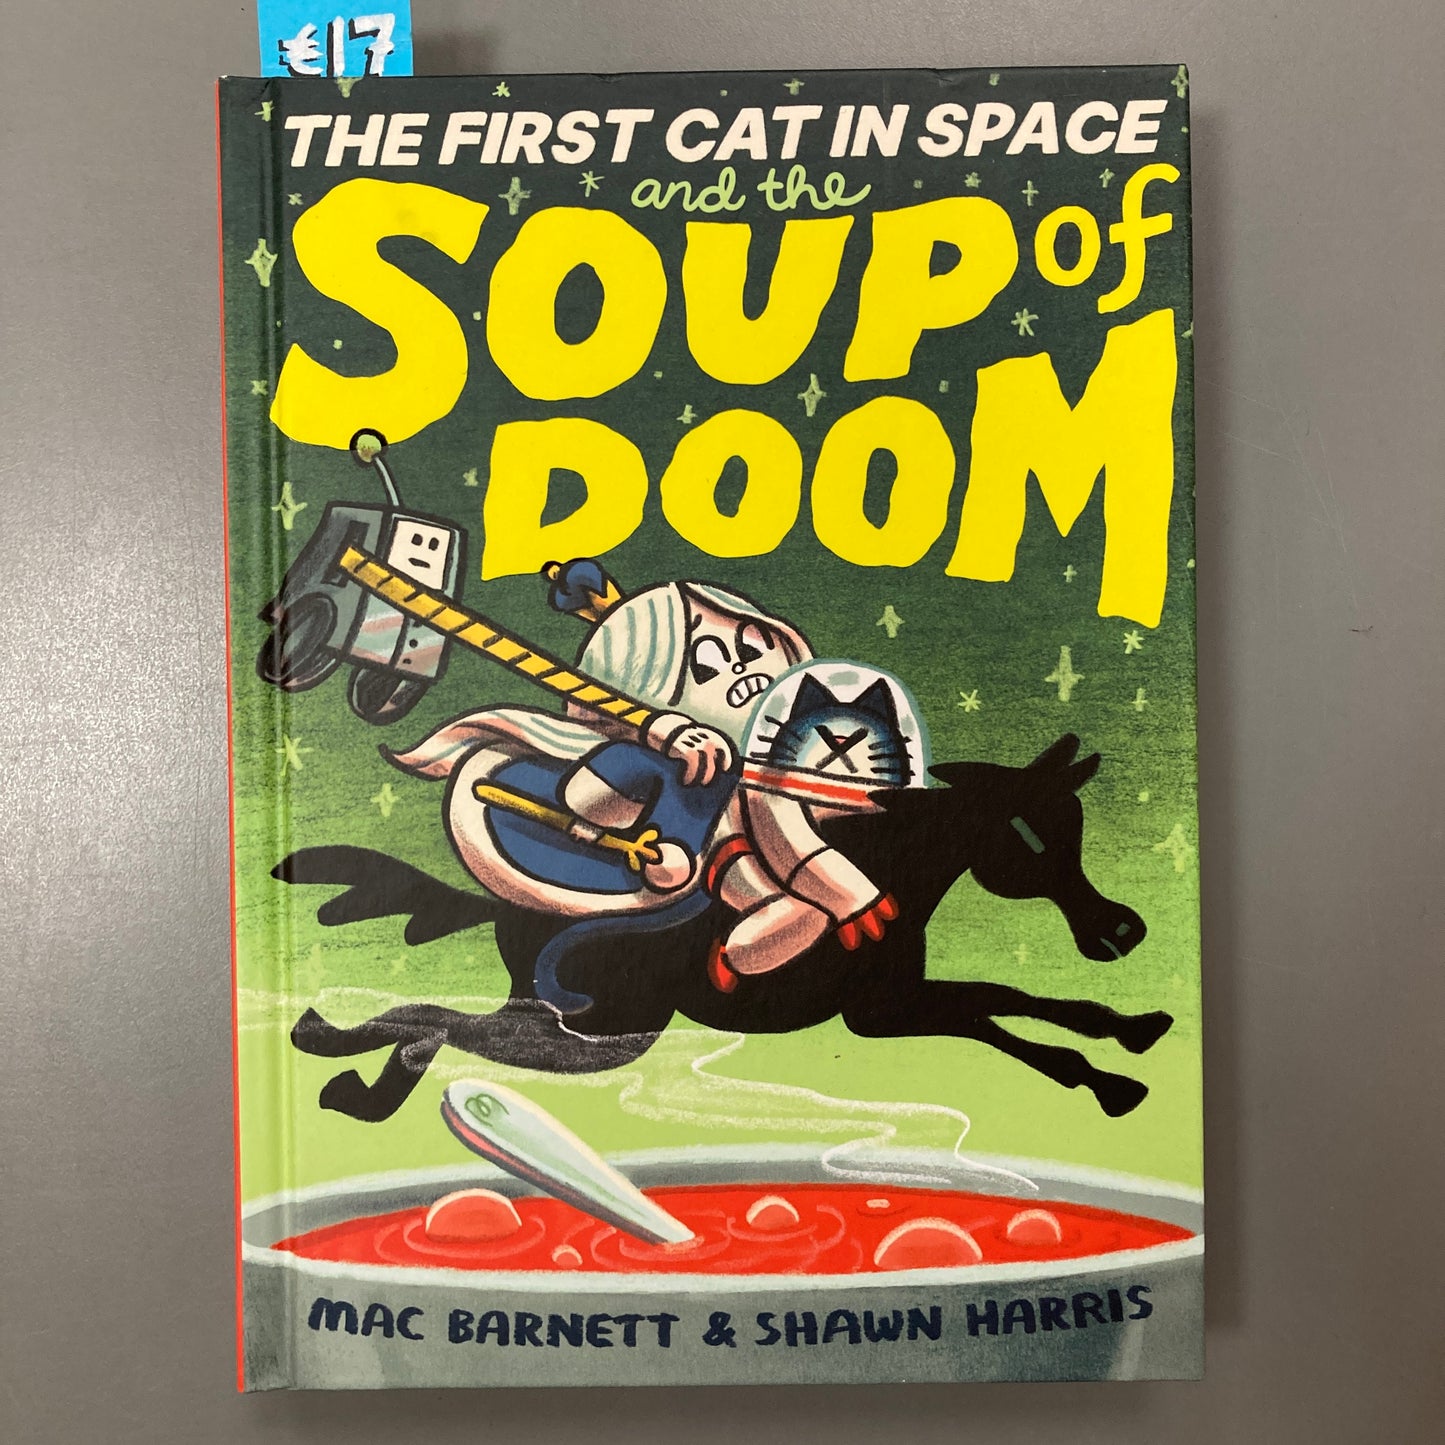 The First Cat in Space and the Soup of Doom (Hardcover)